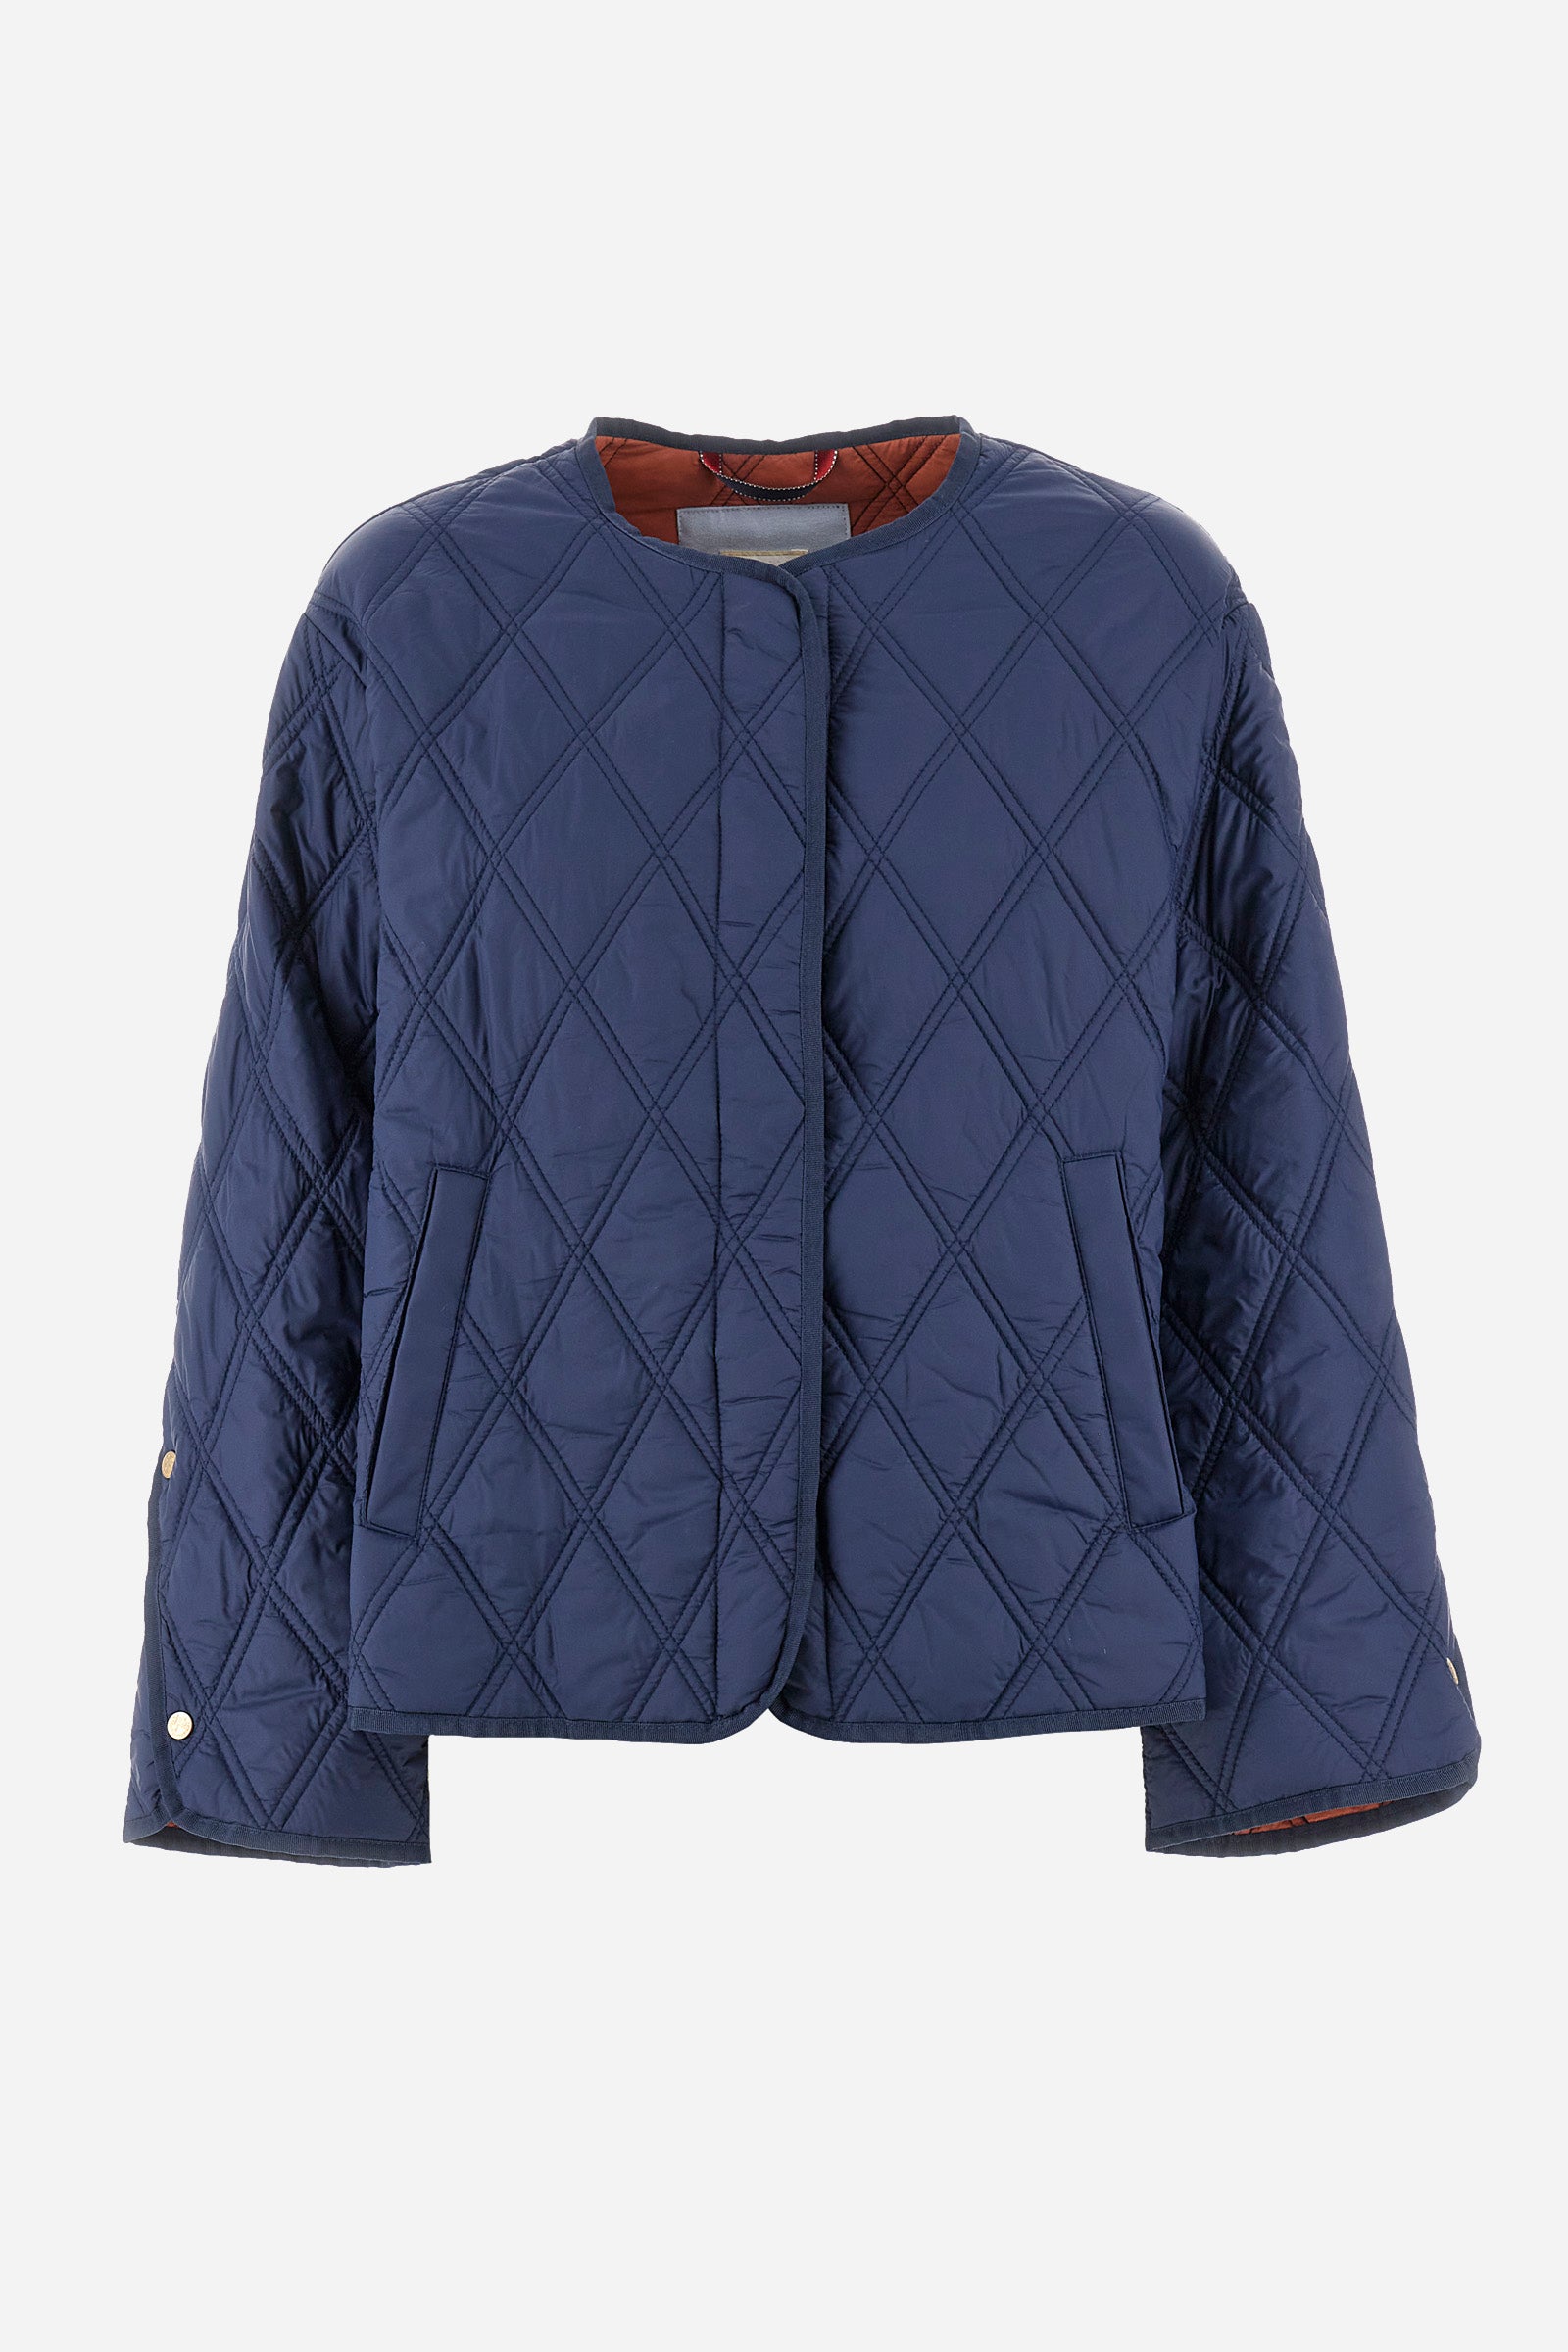 Quilted jacket in synthetic fabric crew neck - Yancie